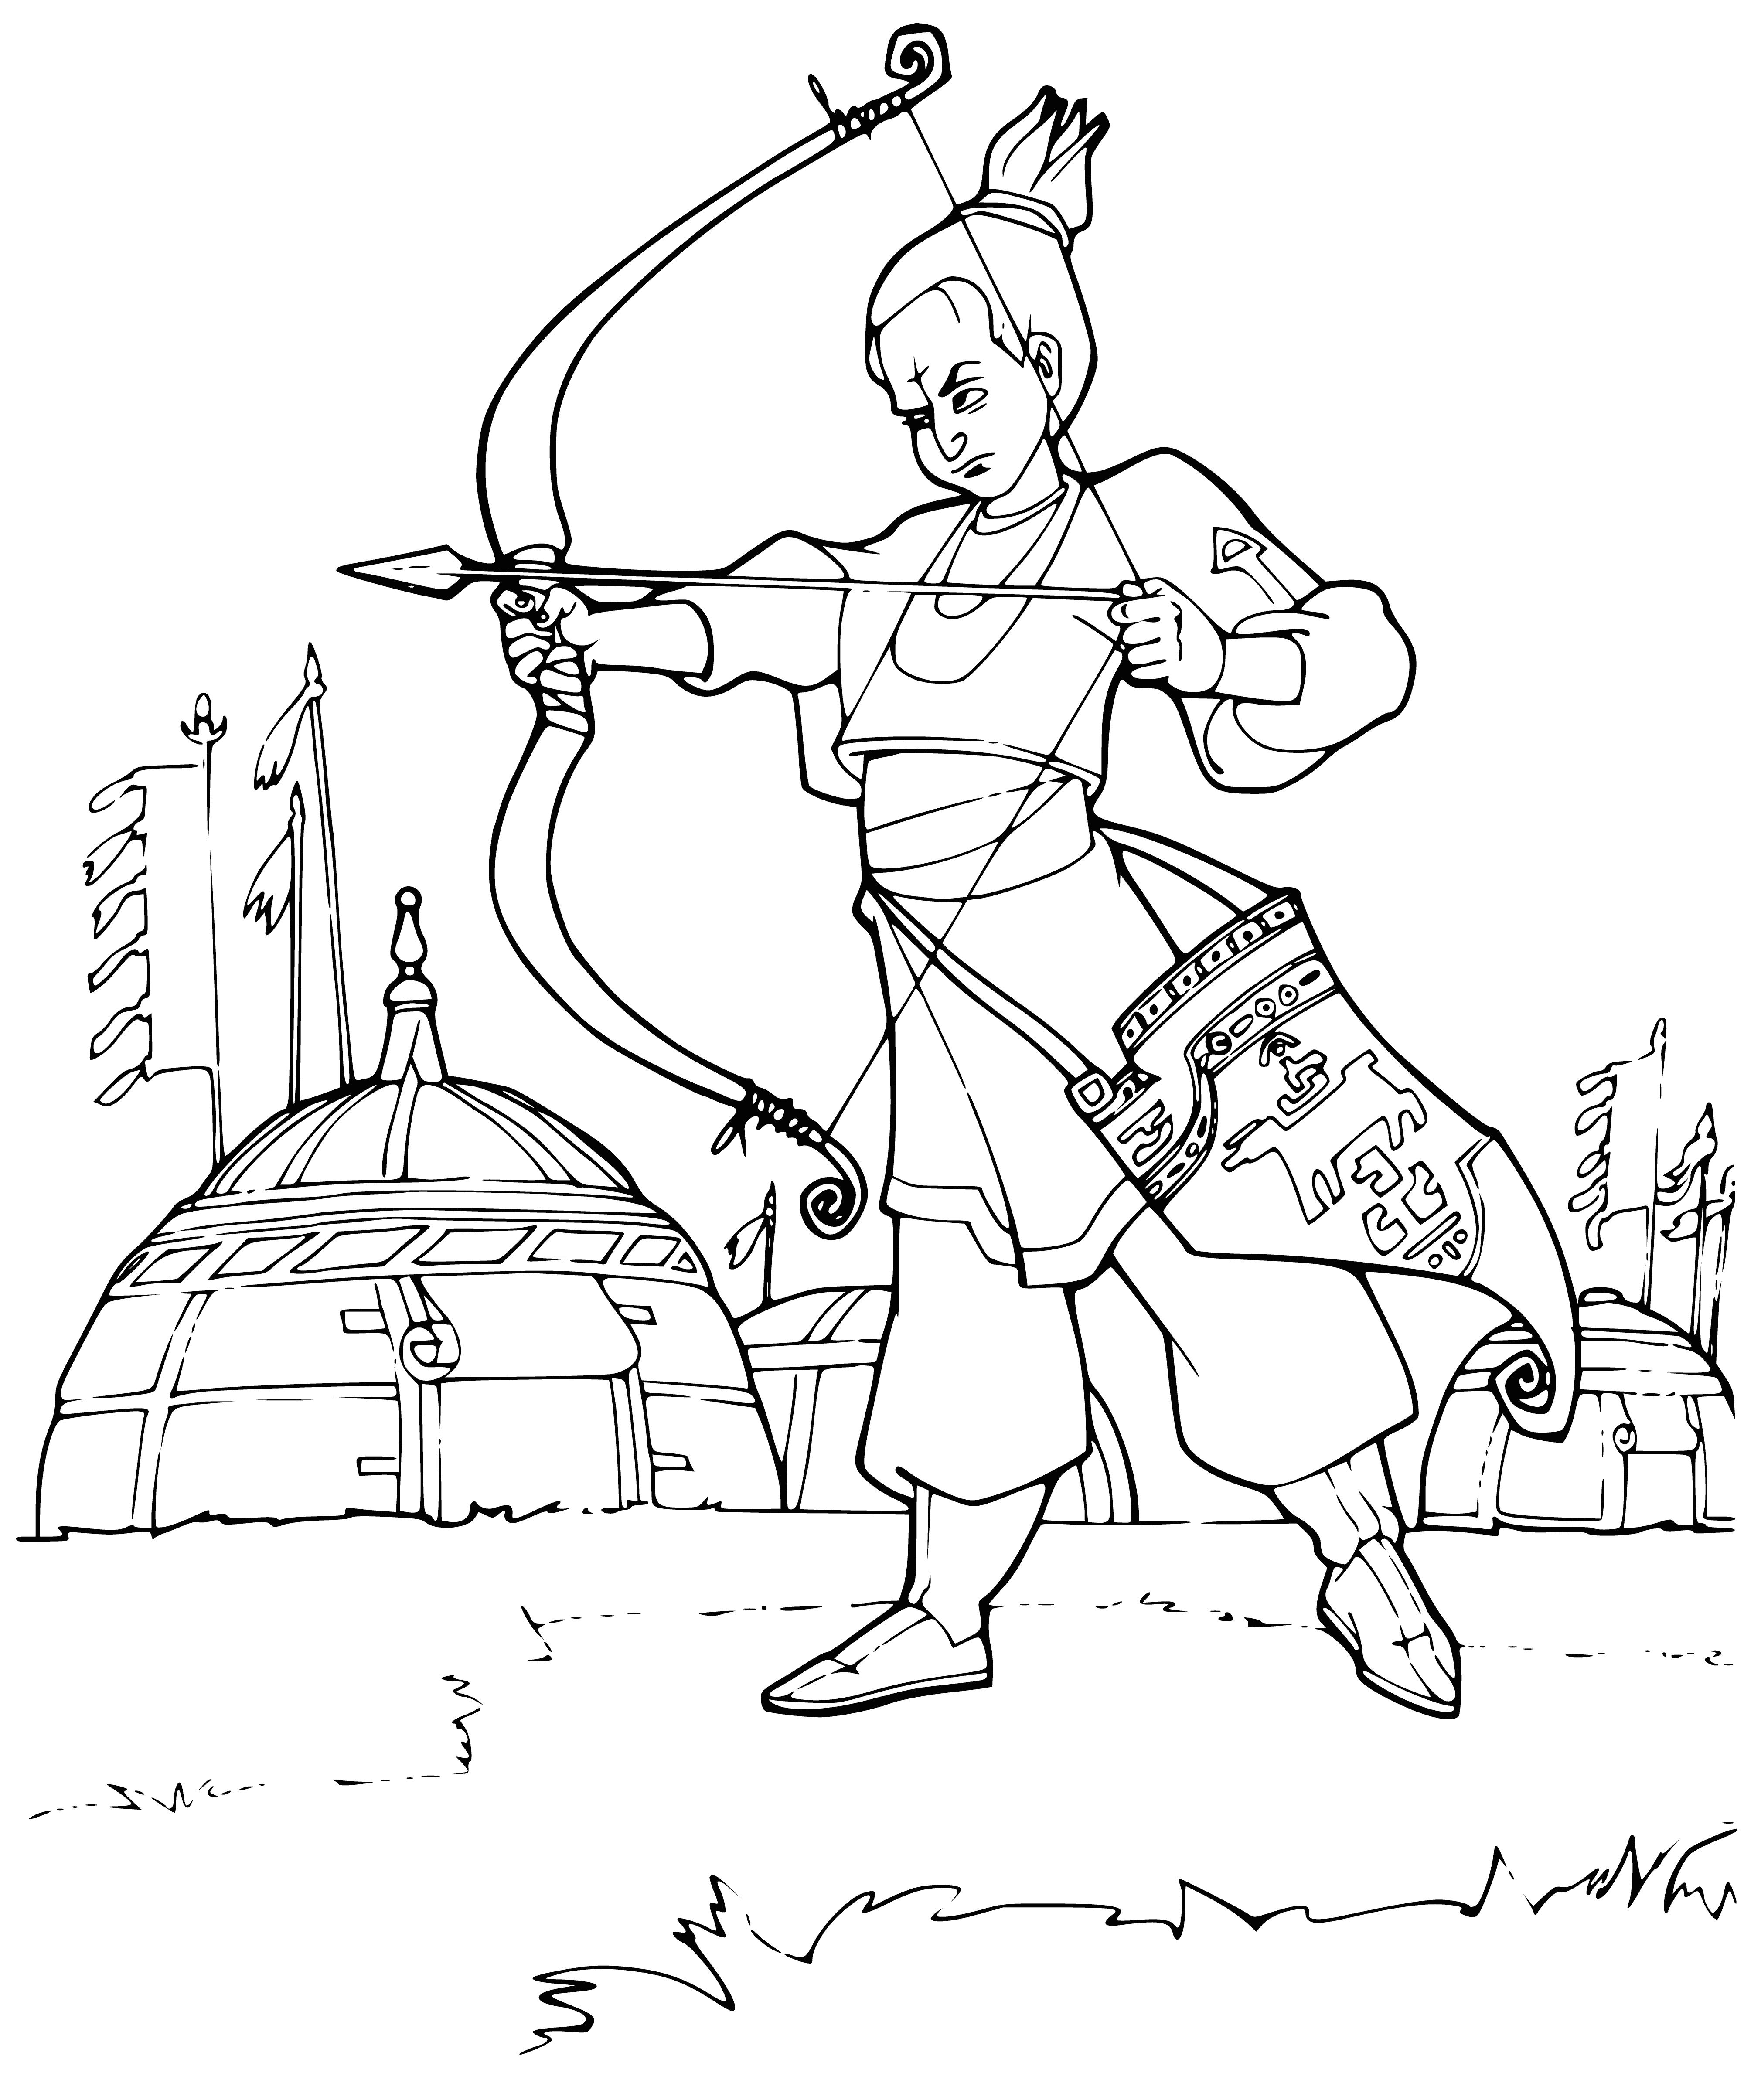 coloring page: Man w/ bow & arrow stands on boat, looks to left, sees city in distance. Has beard, long hair, tunic, cape.